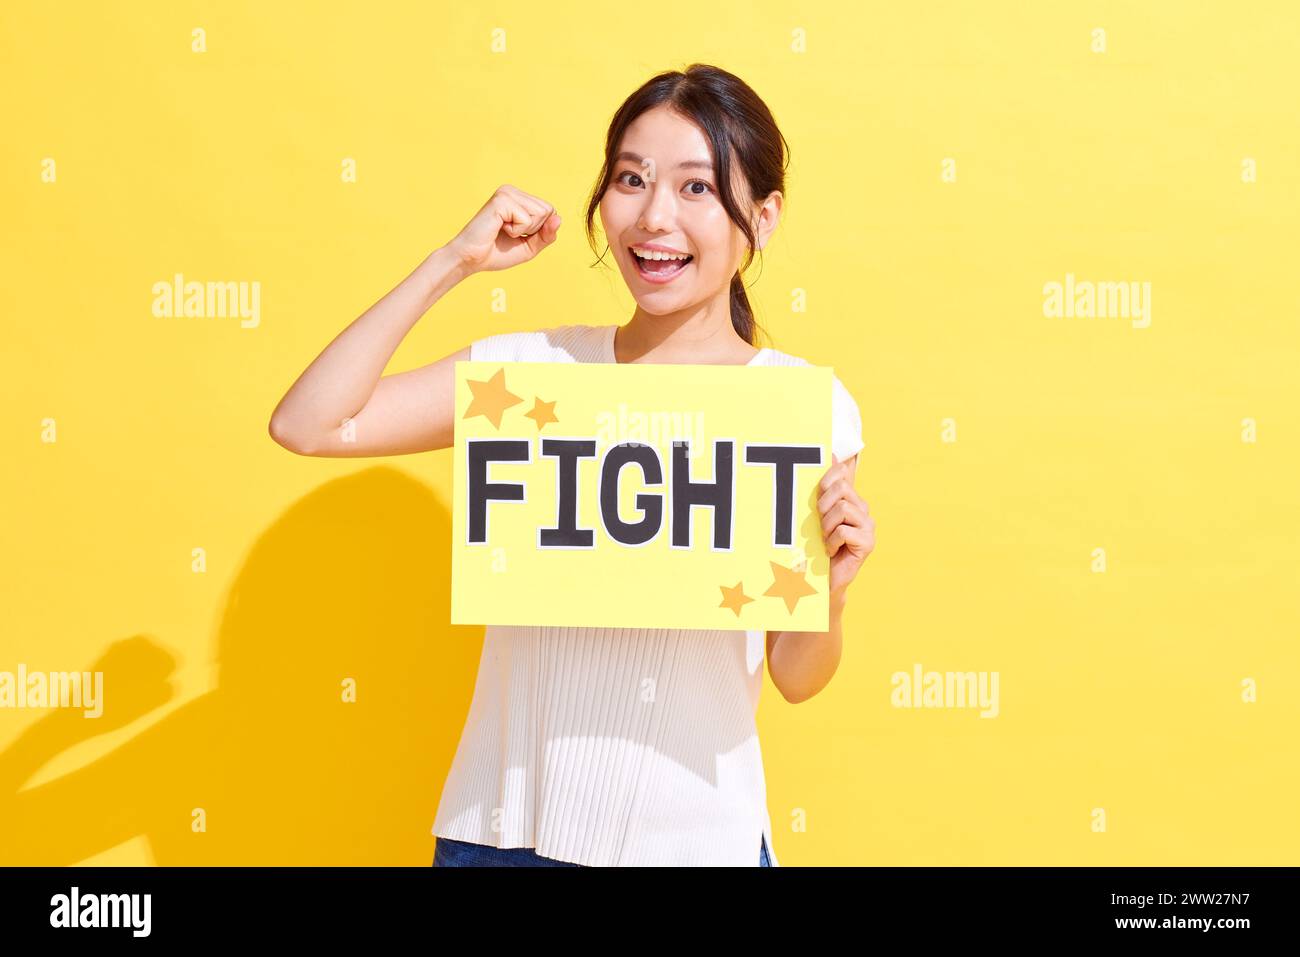 A woman holding up a sign that says fight Stock Photo